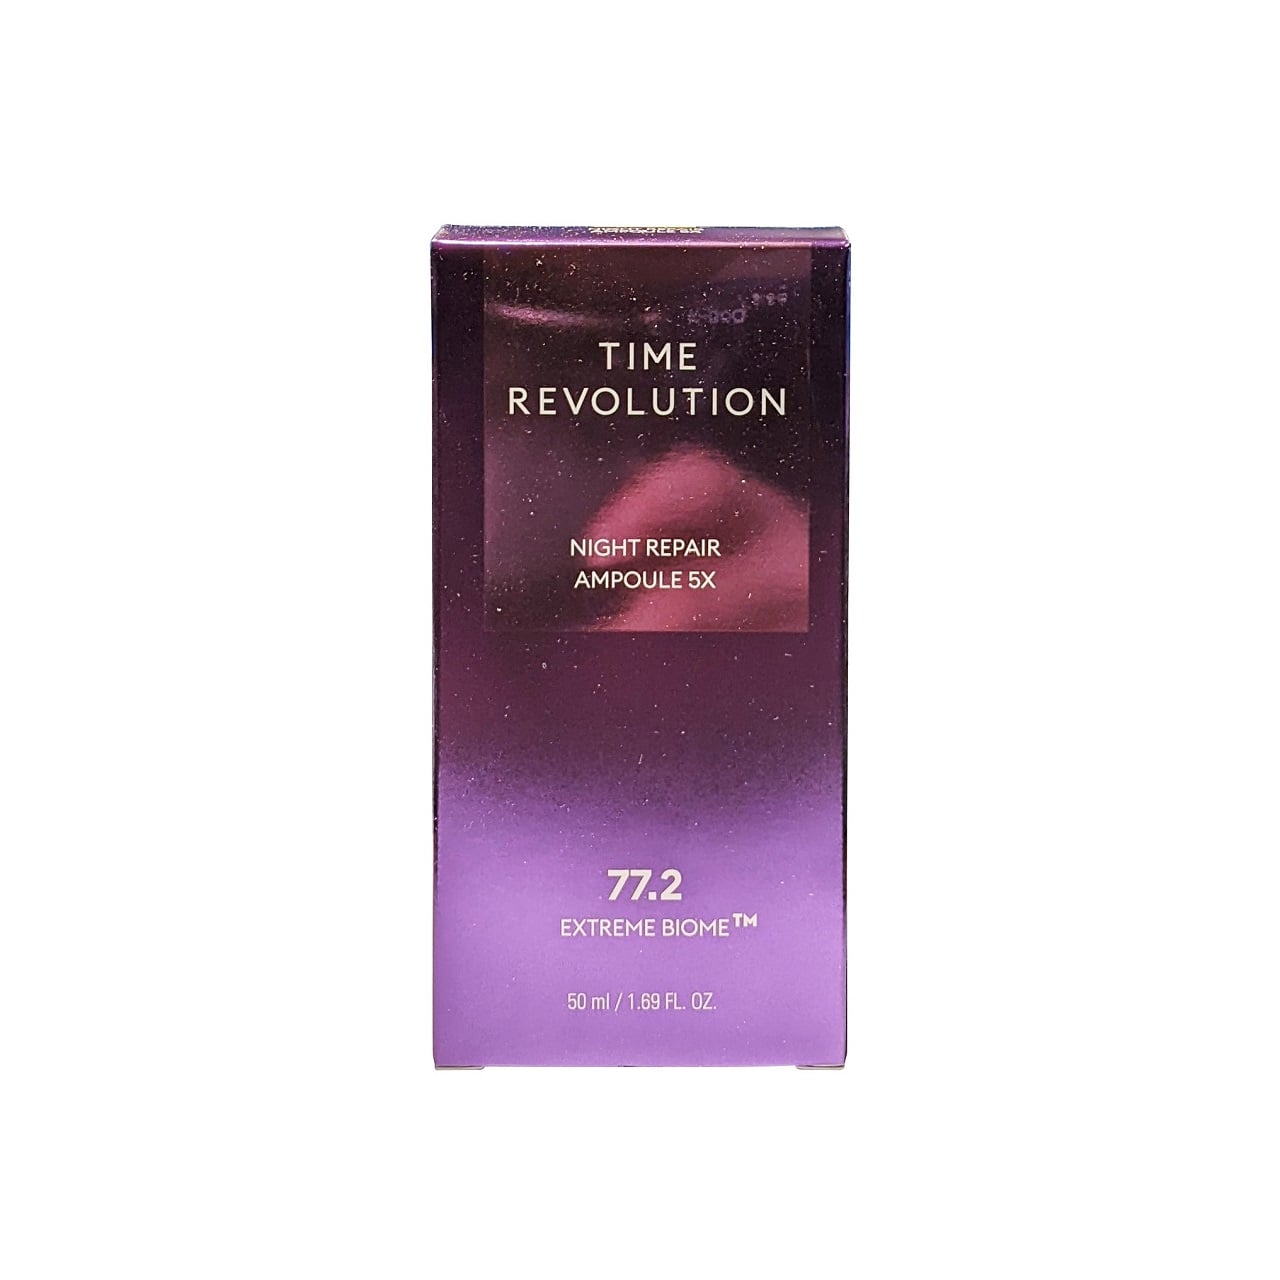 Product label for MISSHA Time Revolution Night Ampoule 5X (50 mL)